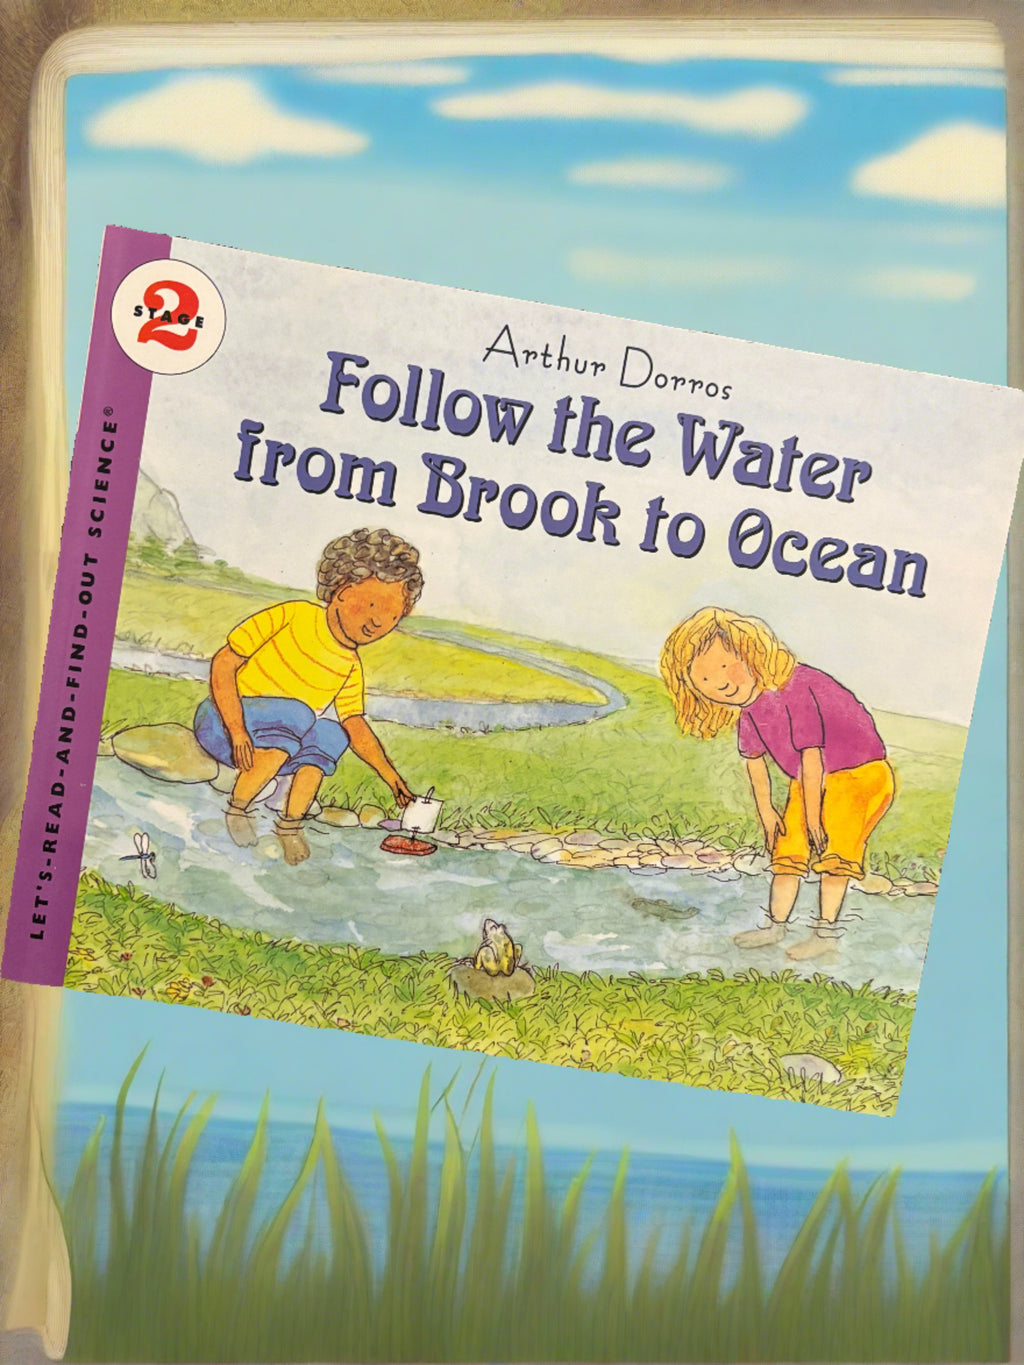 Follow the Water from Brook to Ocean- By Arthur Dorros